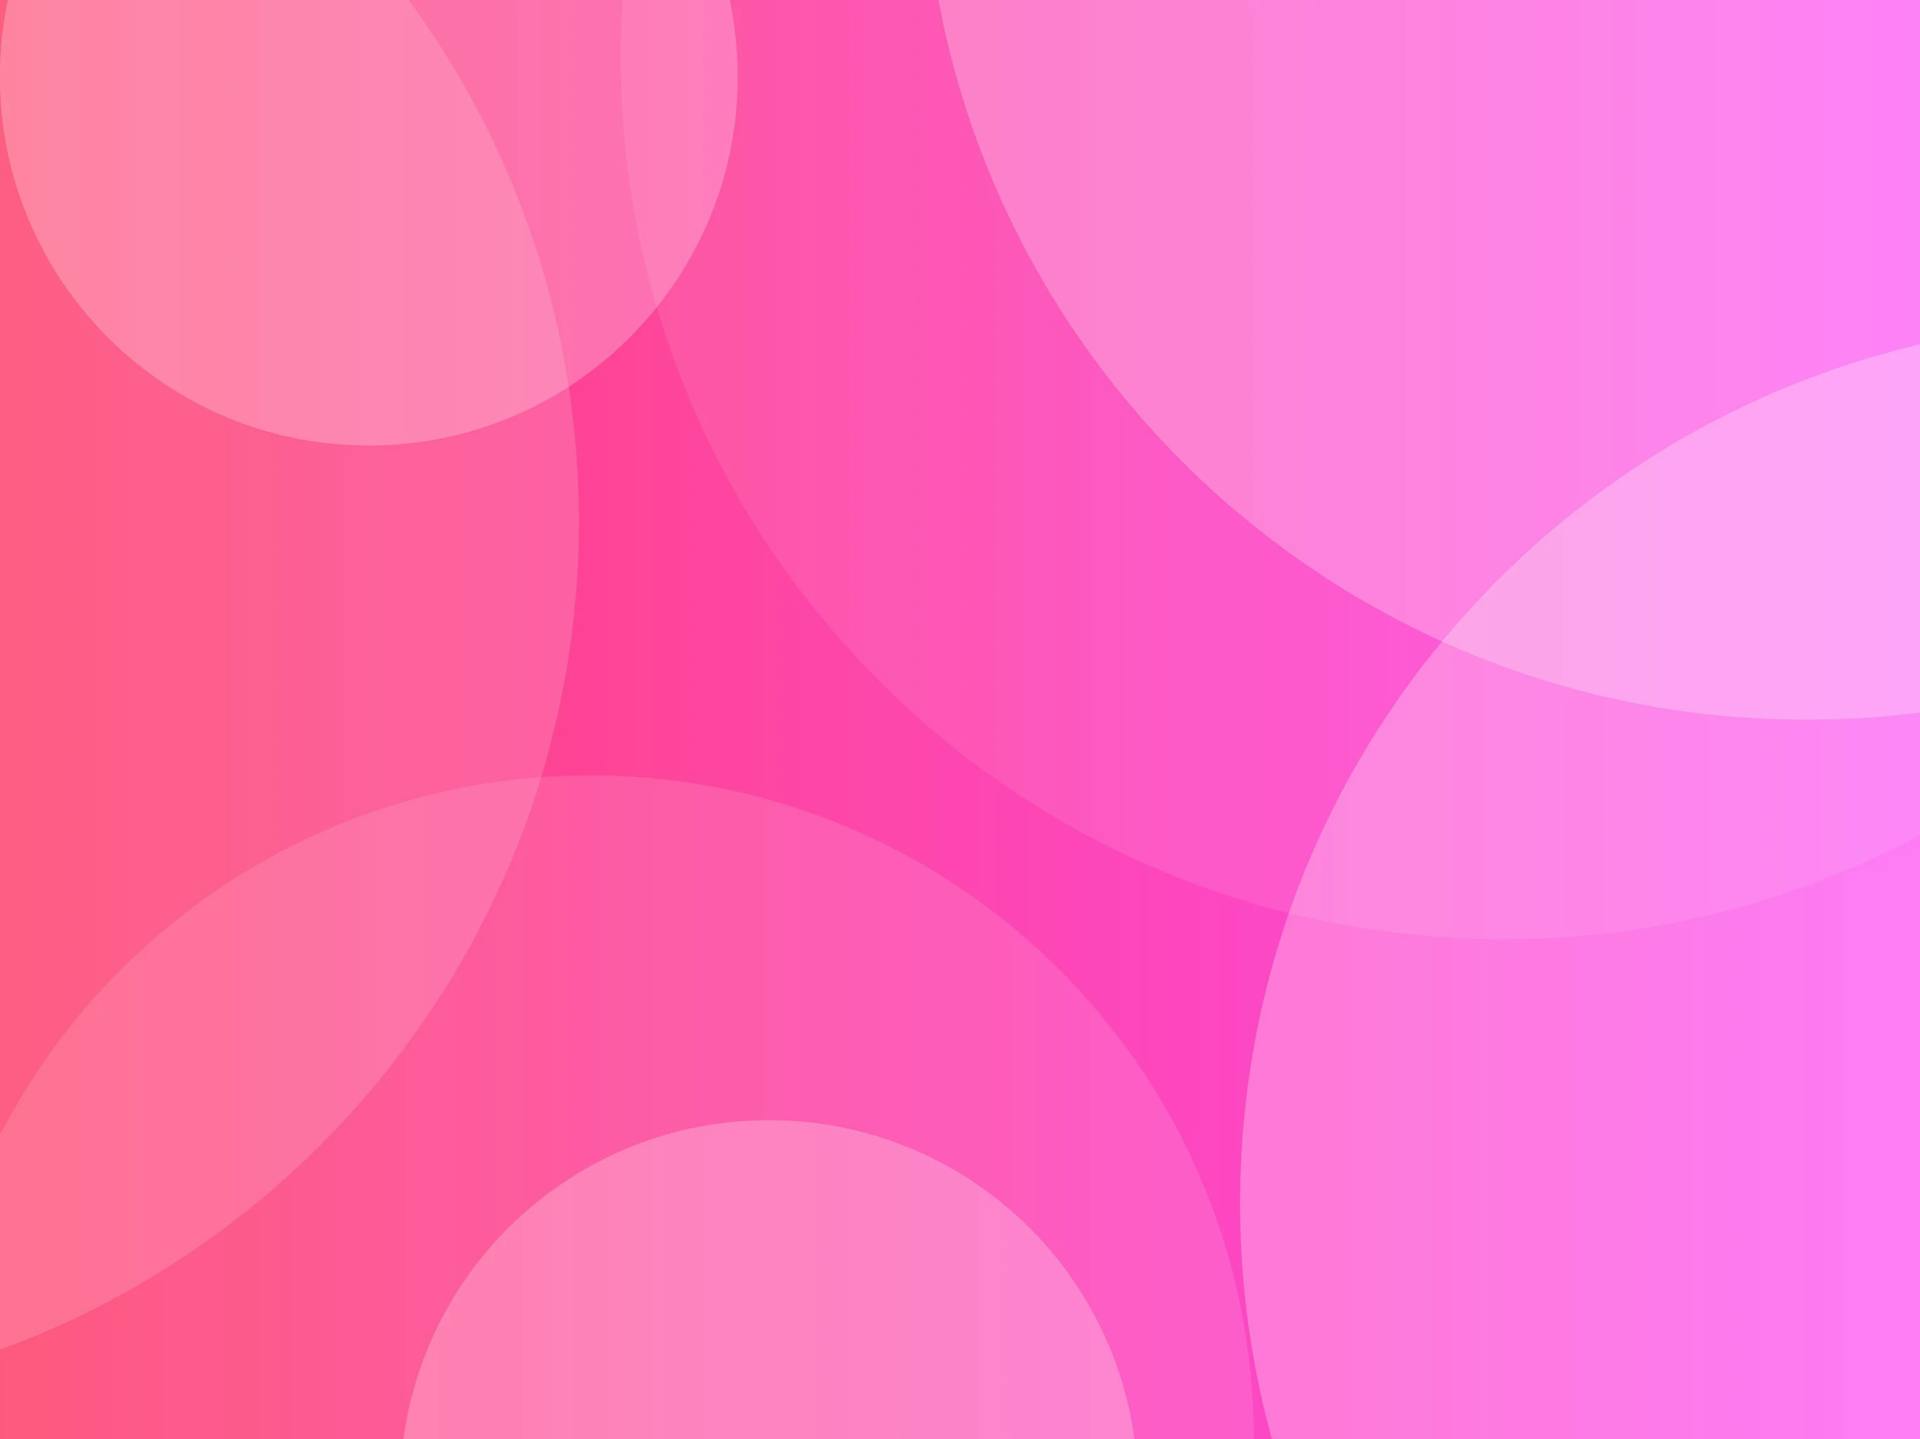 Pink circle pattern background design in rosy tones